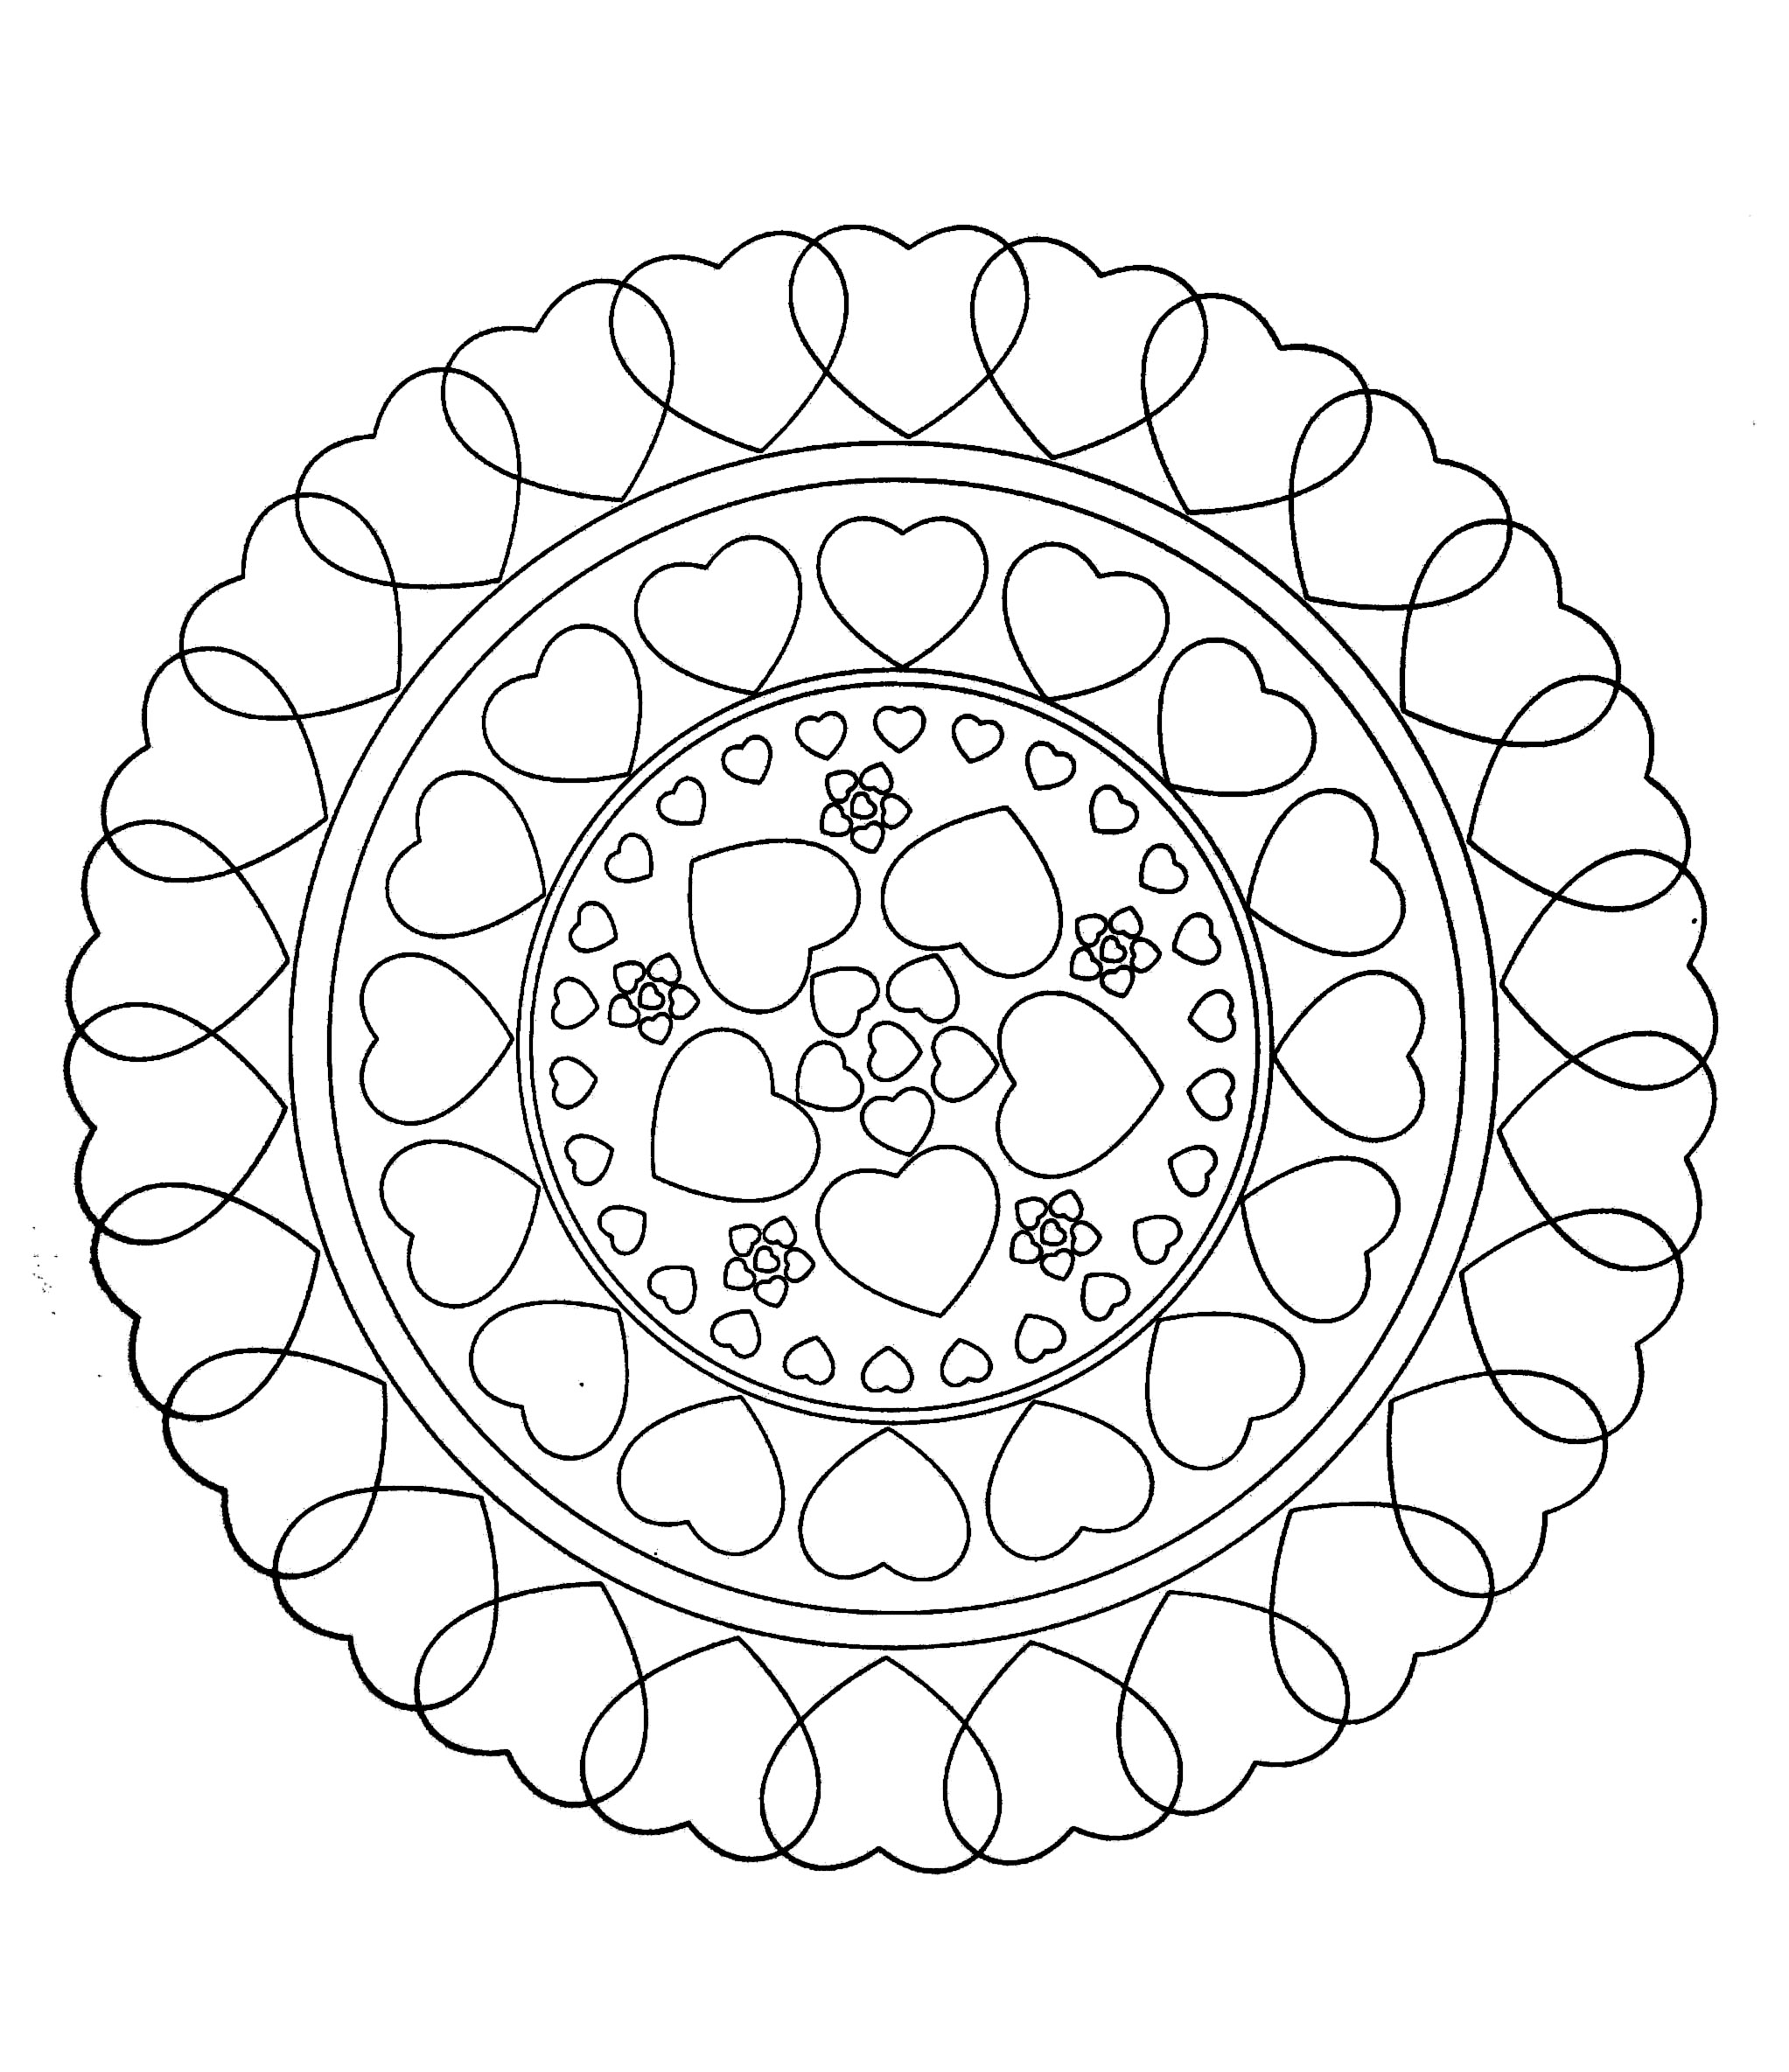 Mandala to color zen relax free (26)